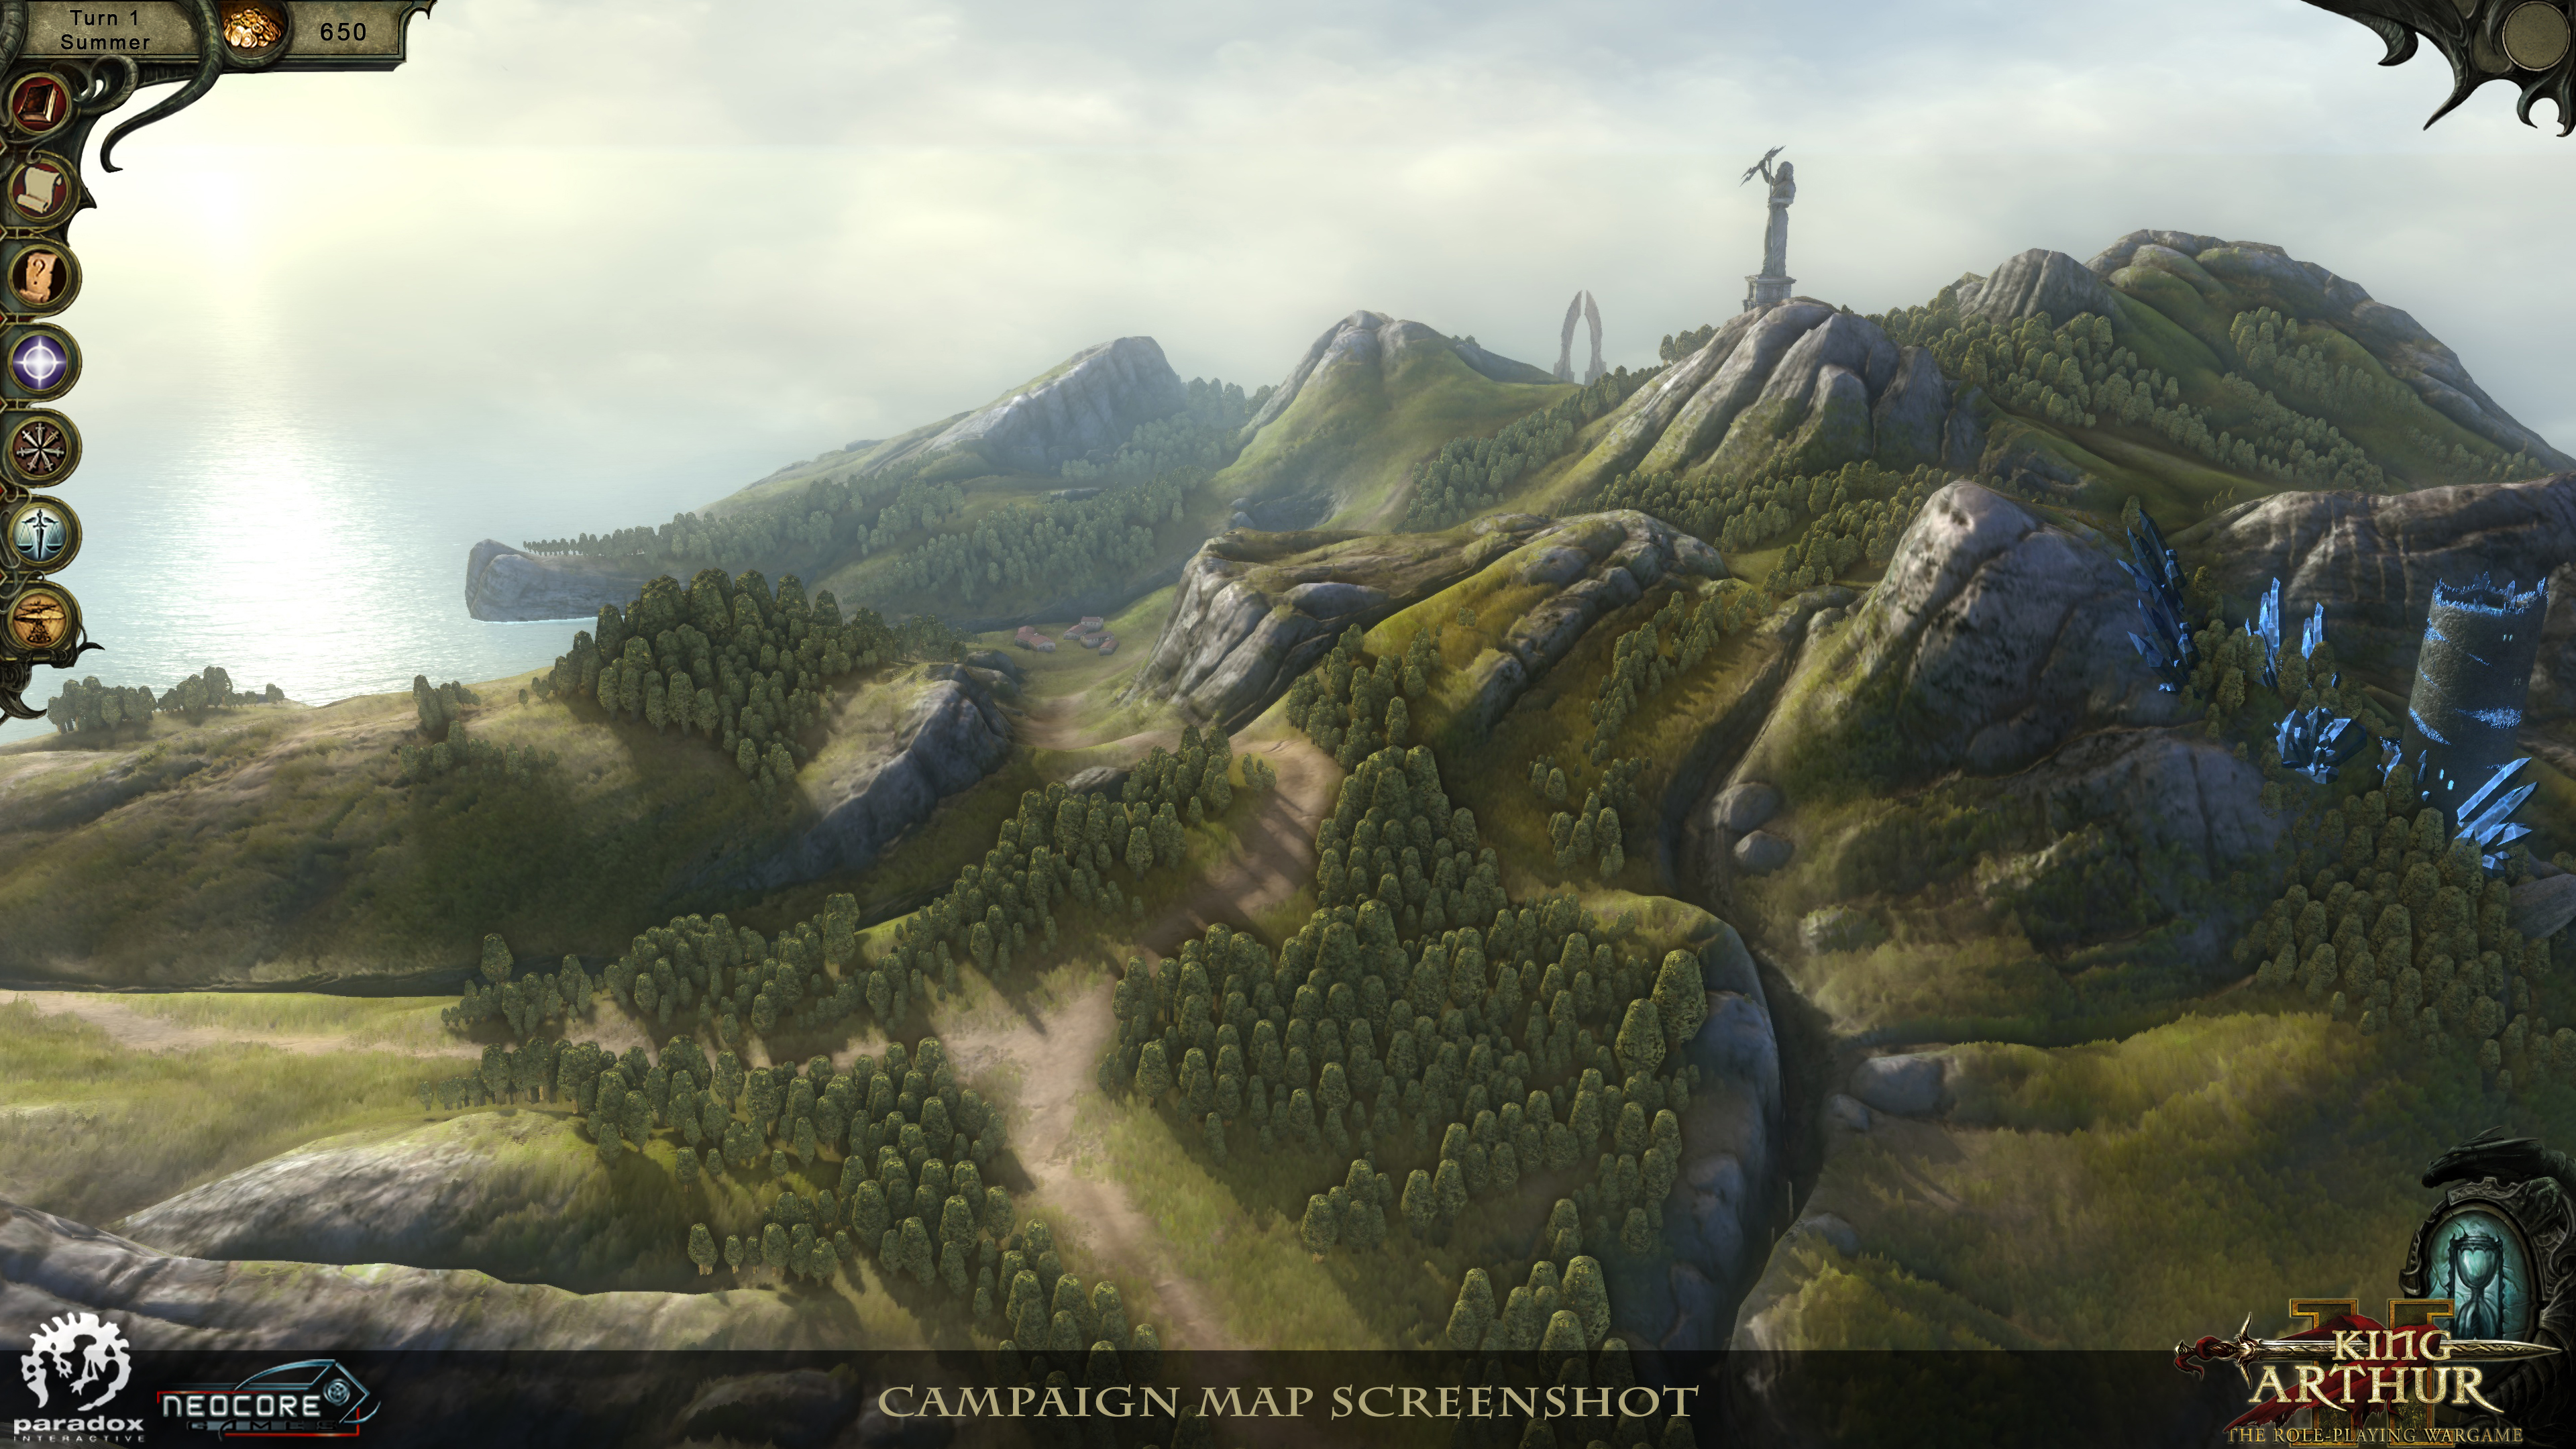 download king arthur 2 the roleplaying wargame